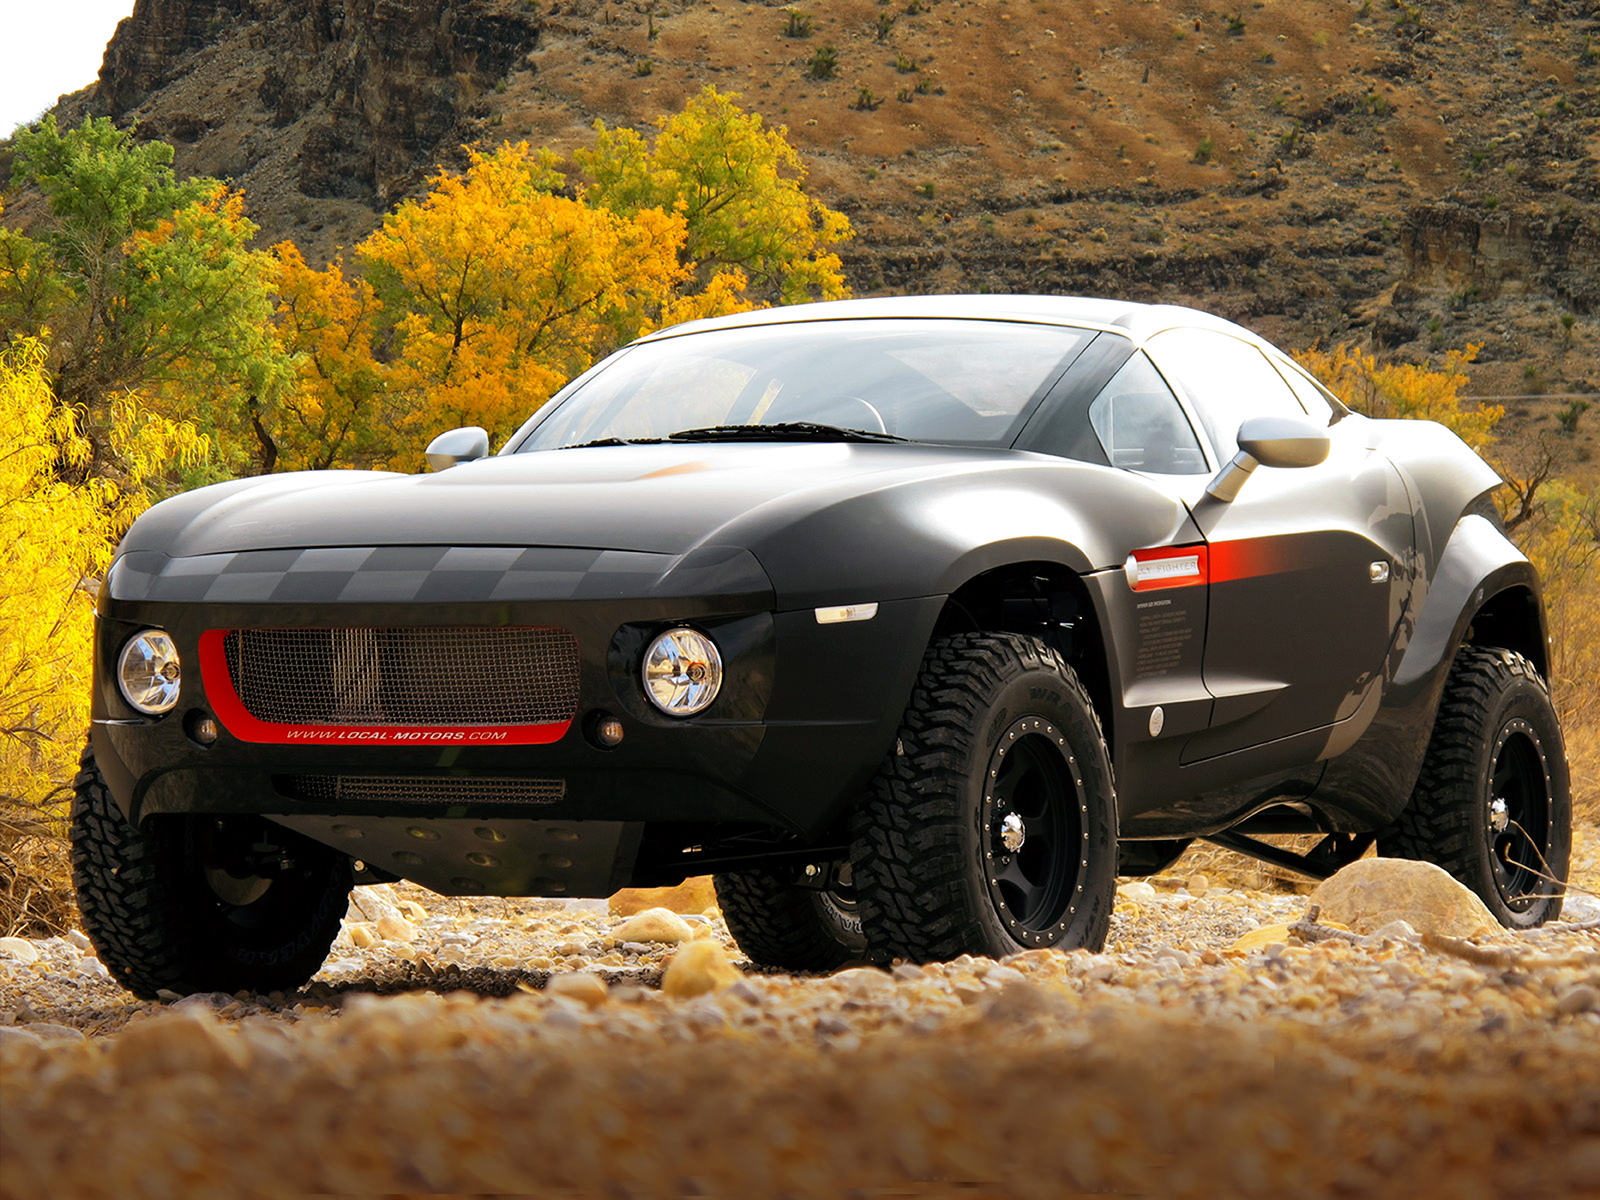 2010, Local motors, Rally, Fighter, 4x4, Offroad, Race, Racing, Hot, Rod, Rods Wallpaper